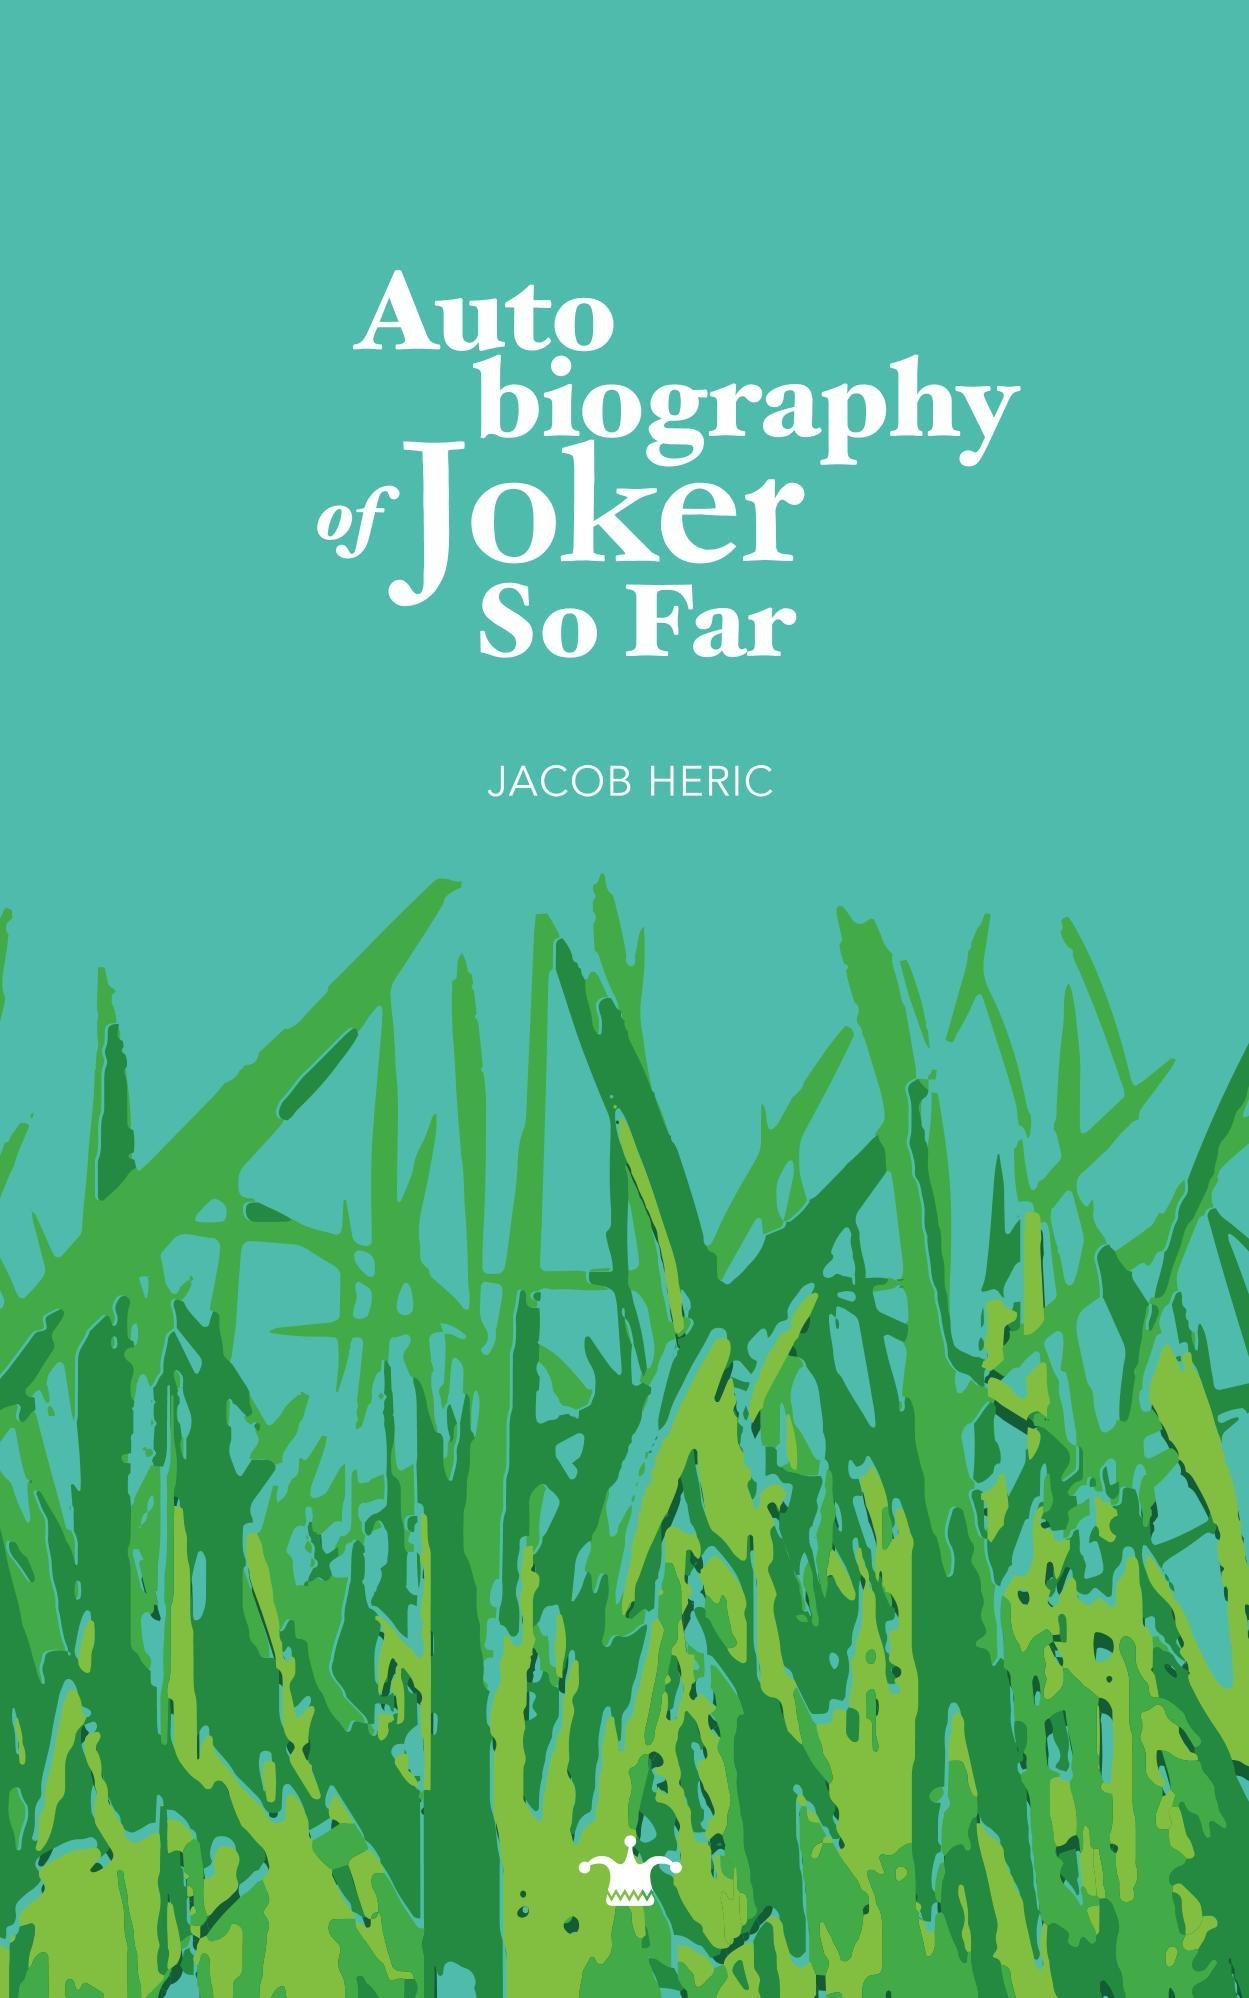 Autobiography of Joker So Far by Jacob Heric Book Cover